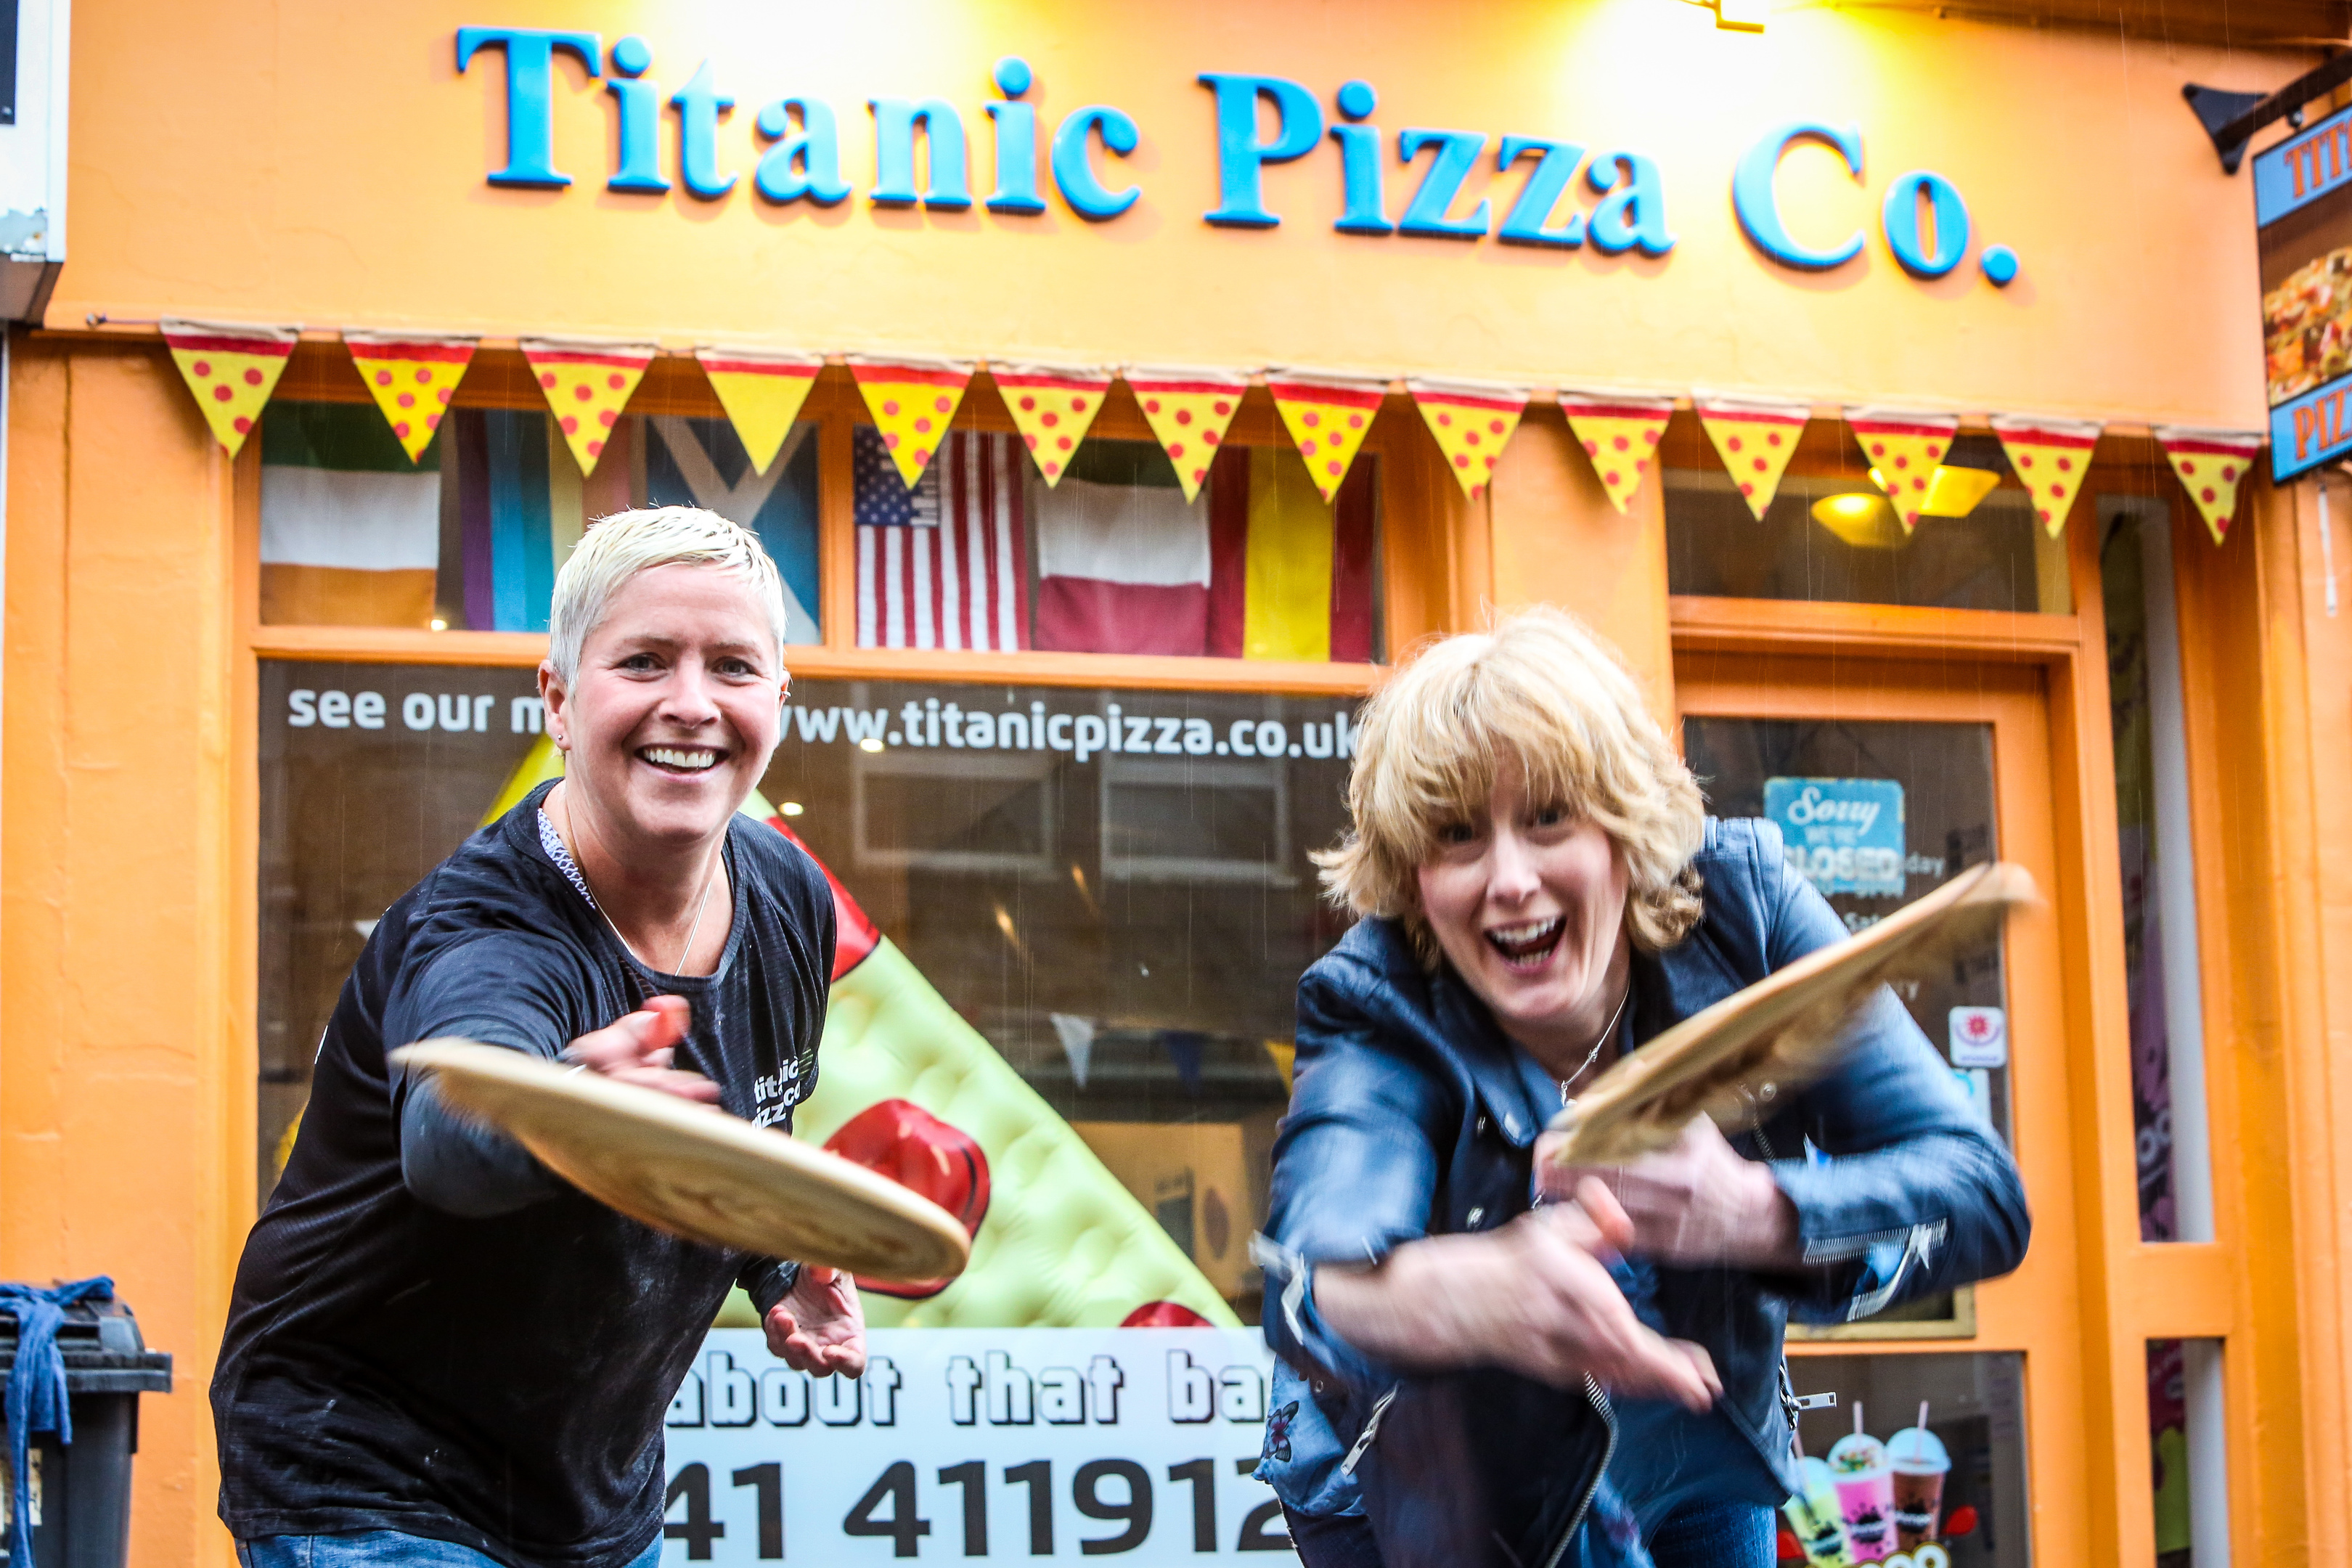 The upcoming Carnoostival festival will feature a pizza flinging competition instead of a discus contest. The pizza bases are being supplied by Marie Fagan (left) of the town's Titanic Pizza. Marie is shown with festival organiser Suzi Caesar.